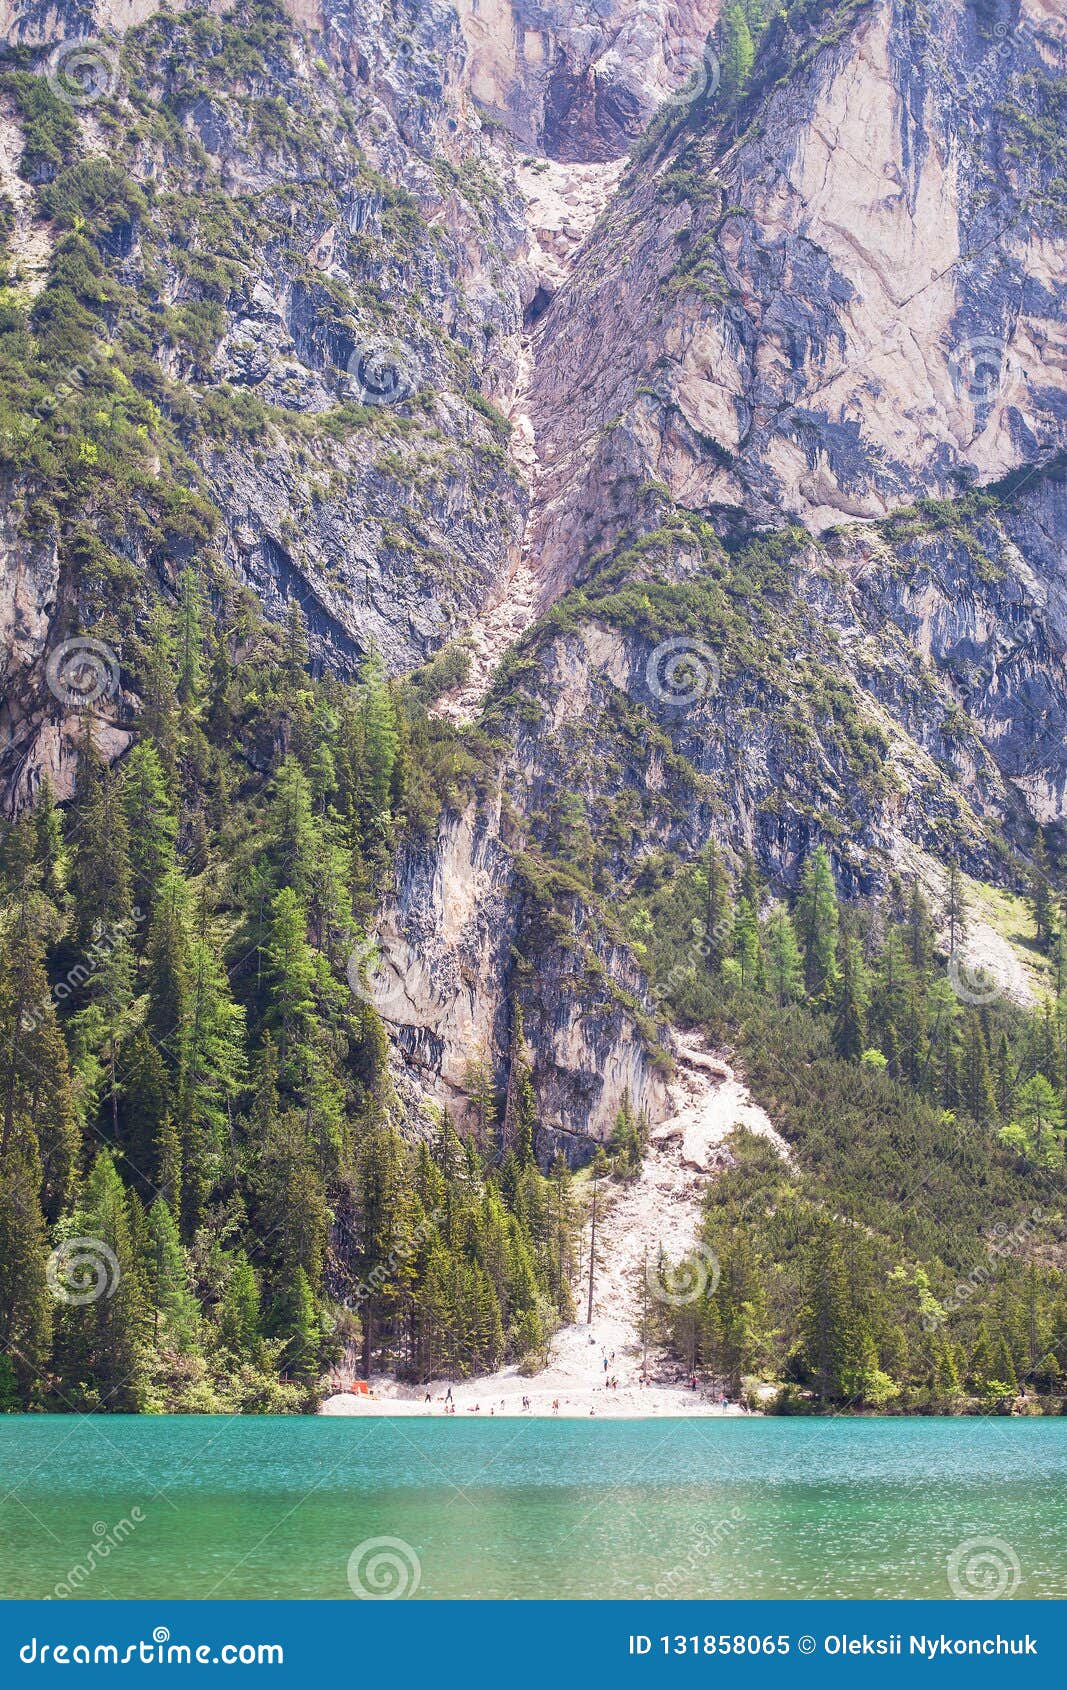 mudflow with snow high in the alpine mountains lake, lago di braies